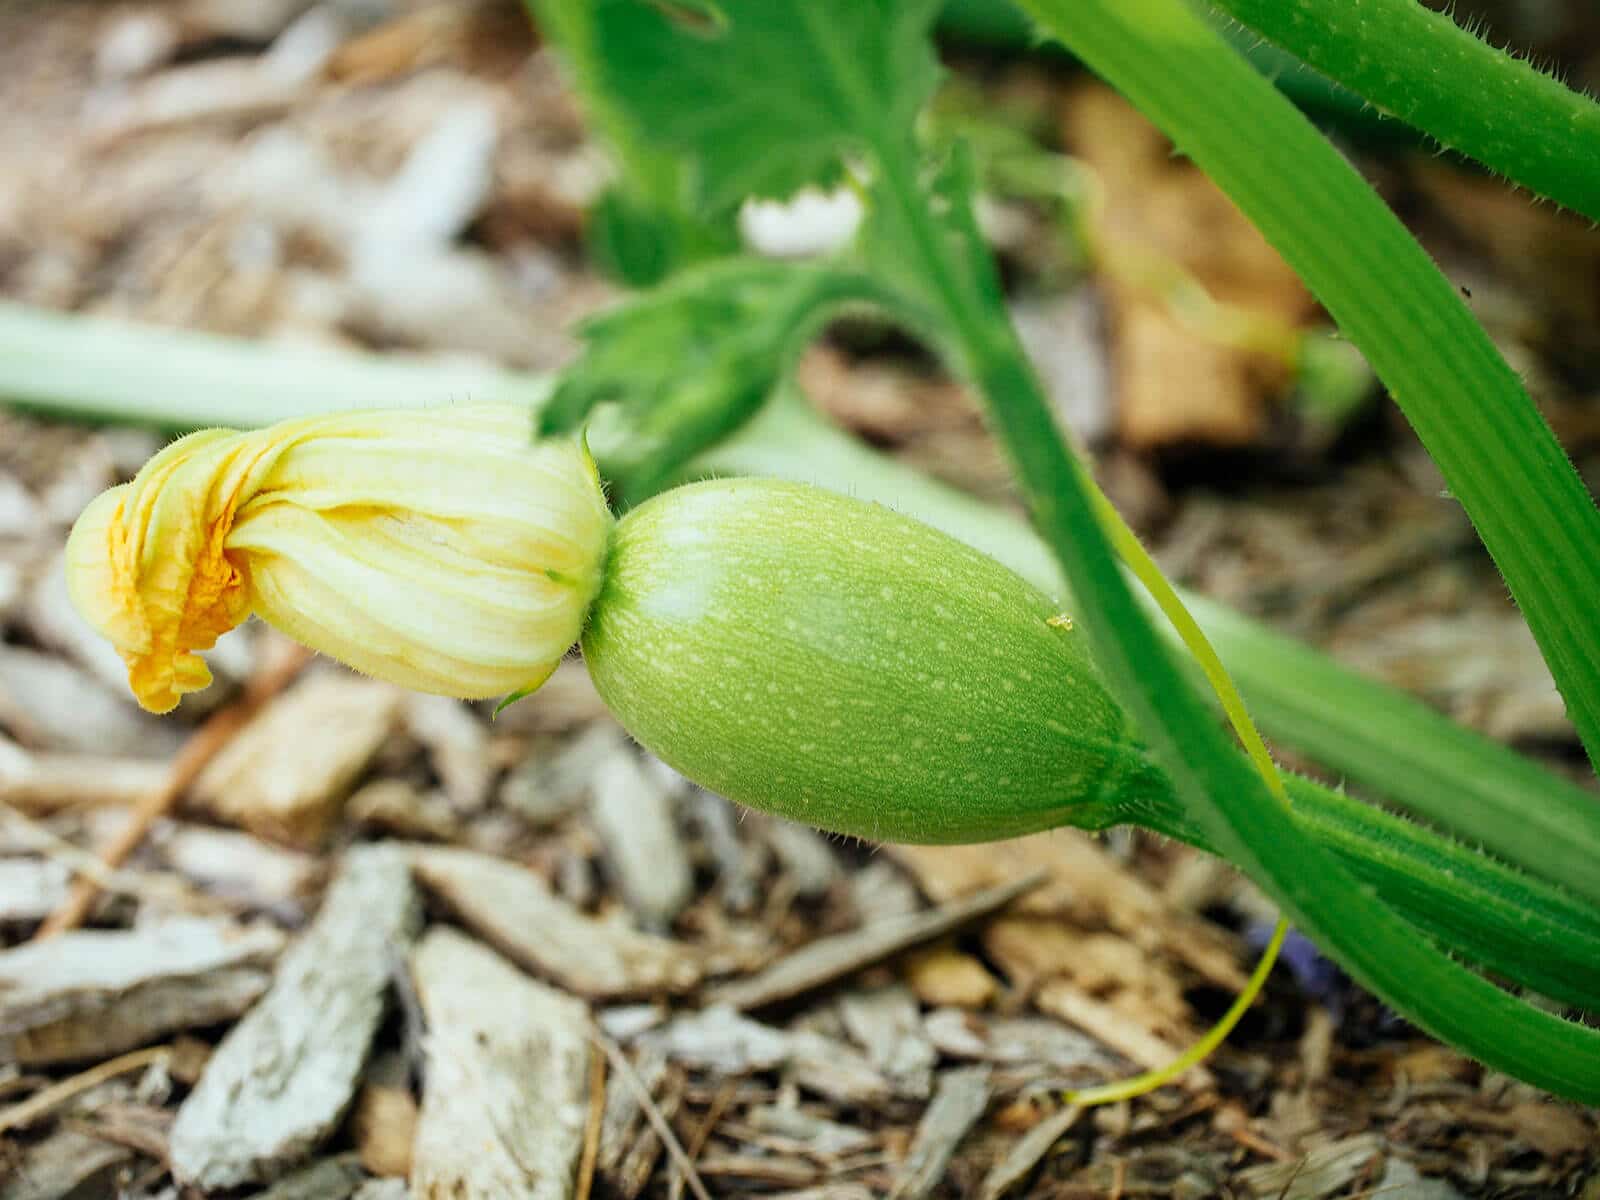 Female zucchini flower growing low to the ground